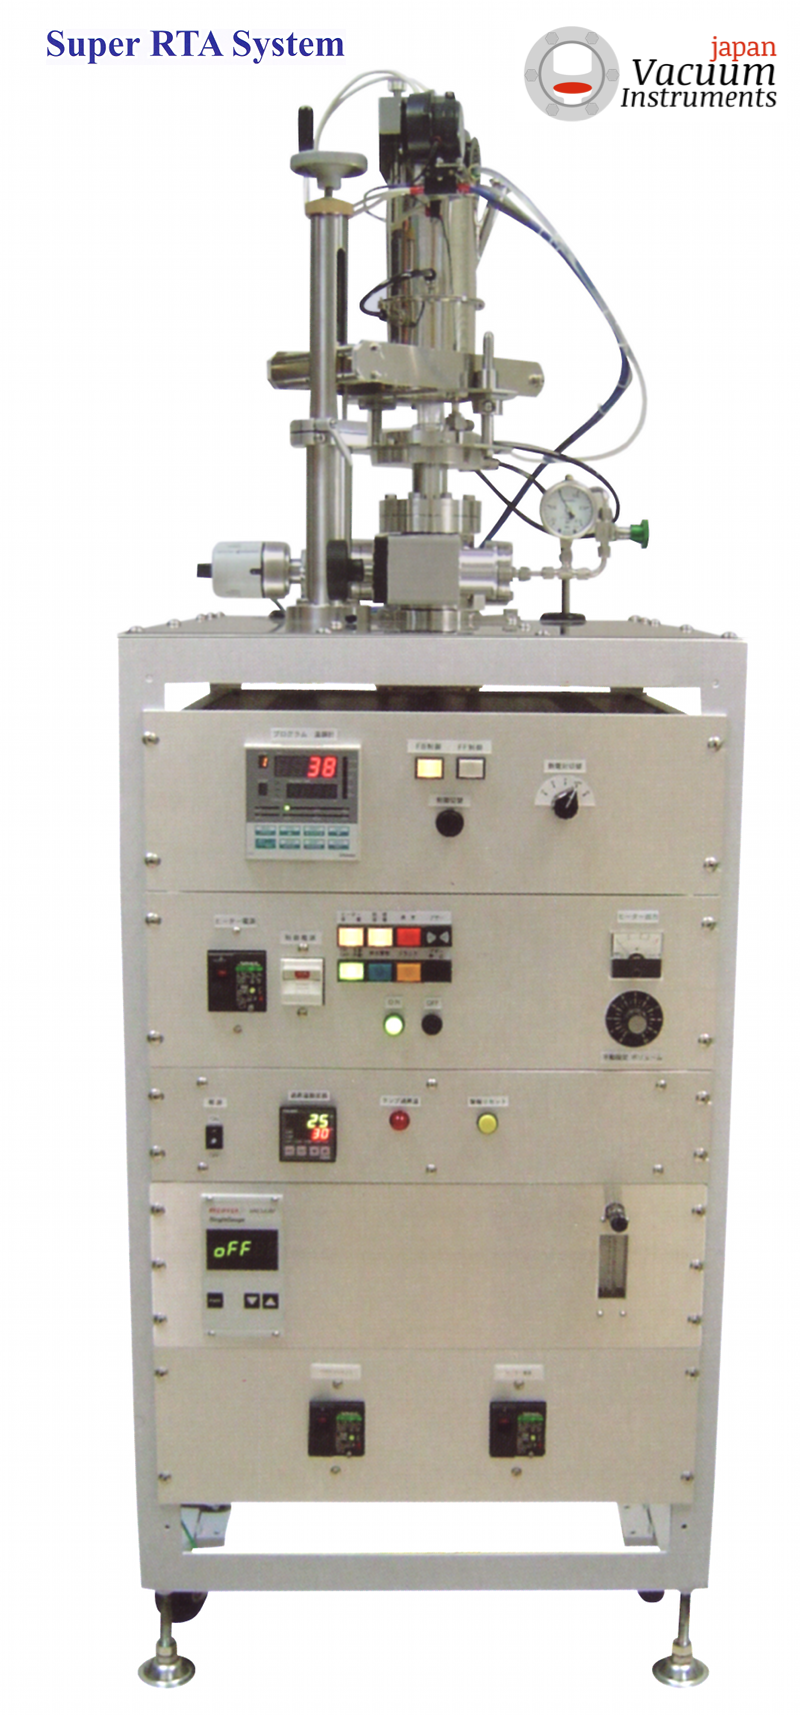 Super RTA System - Ultrahigh Temperature Rapid Annealing System